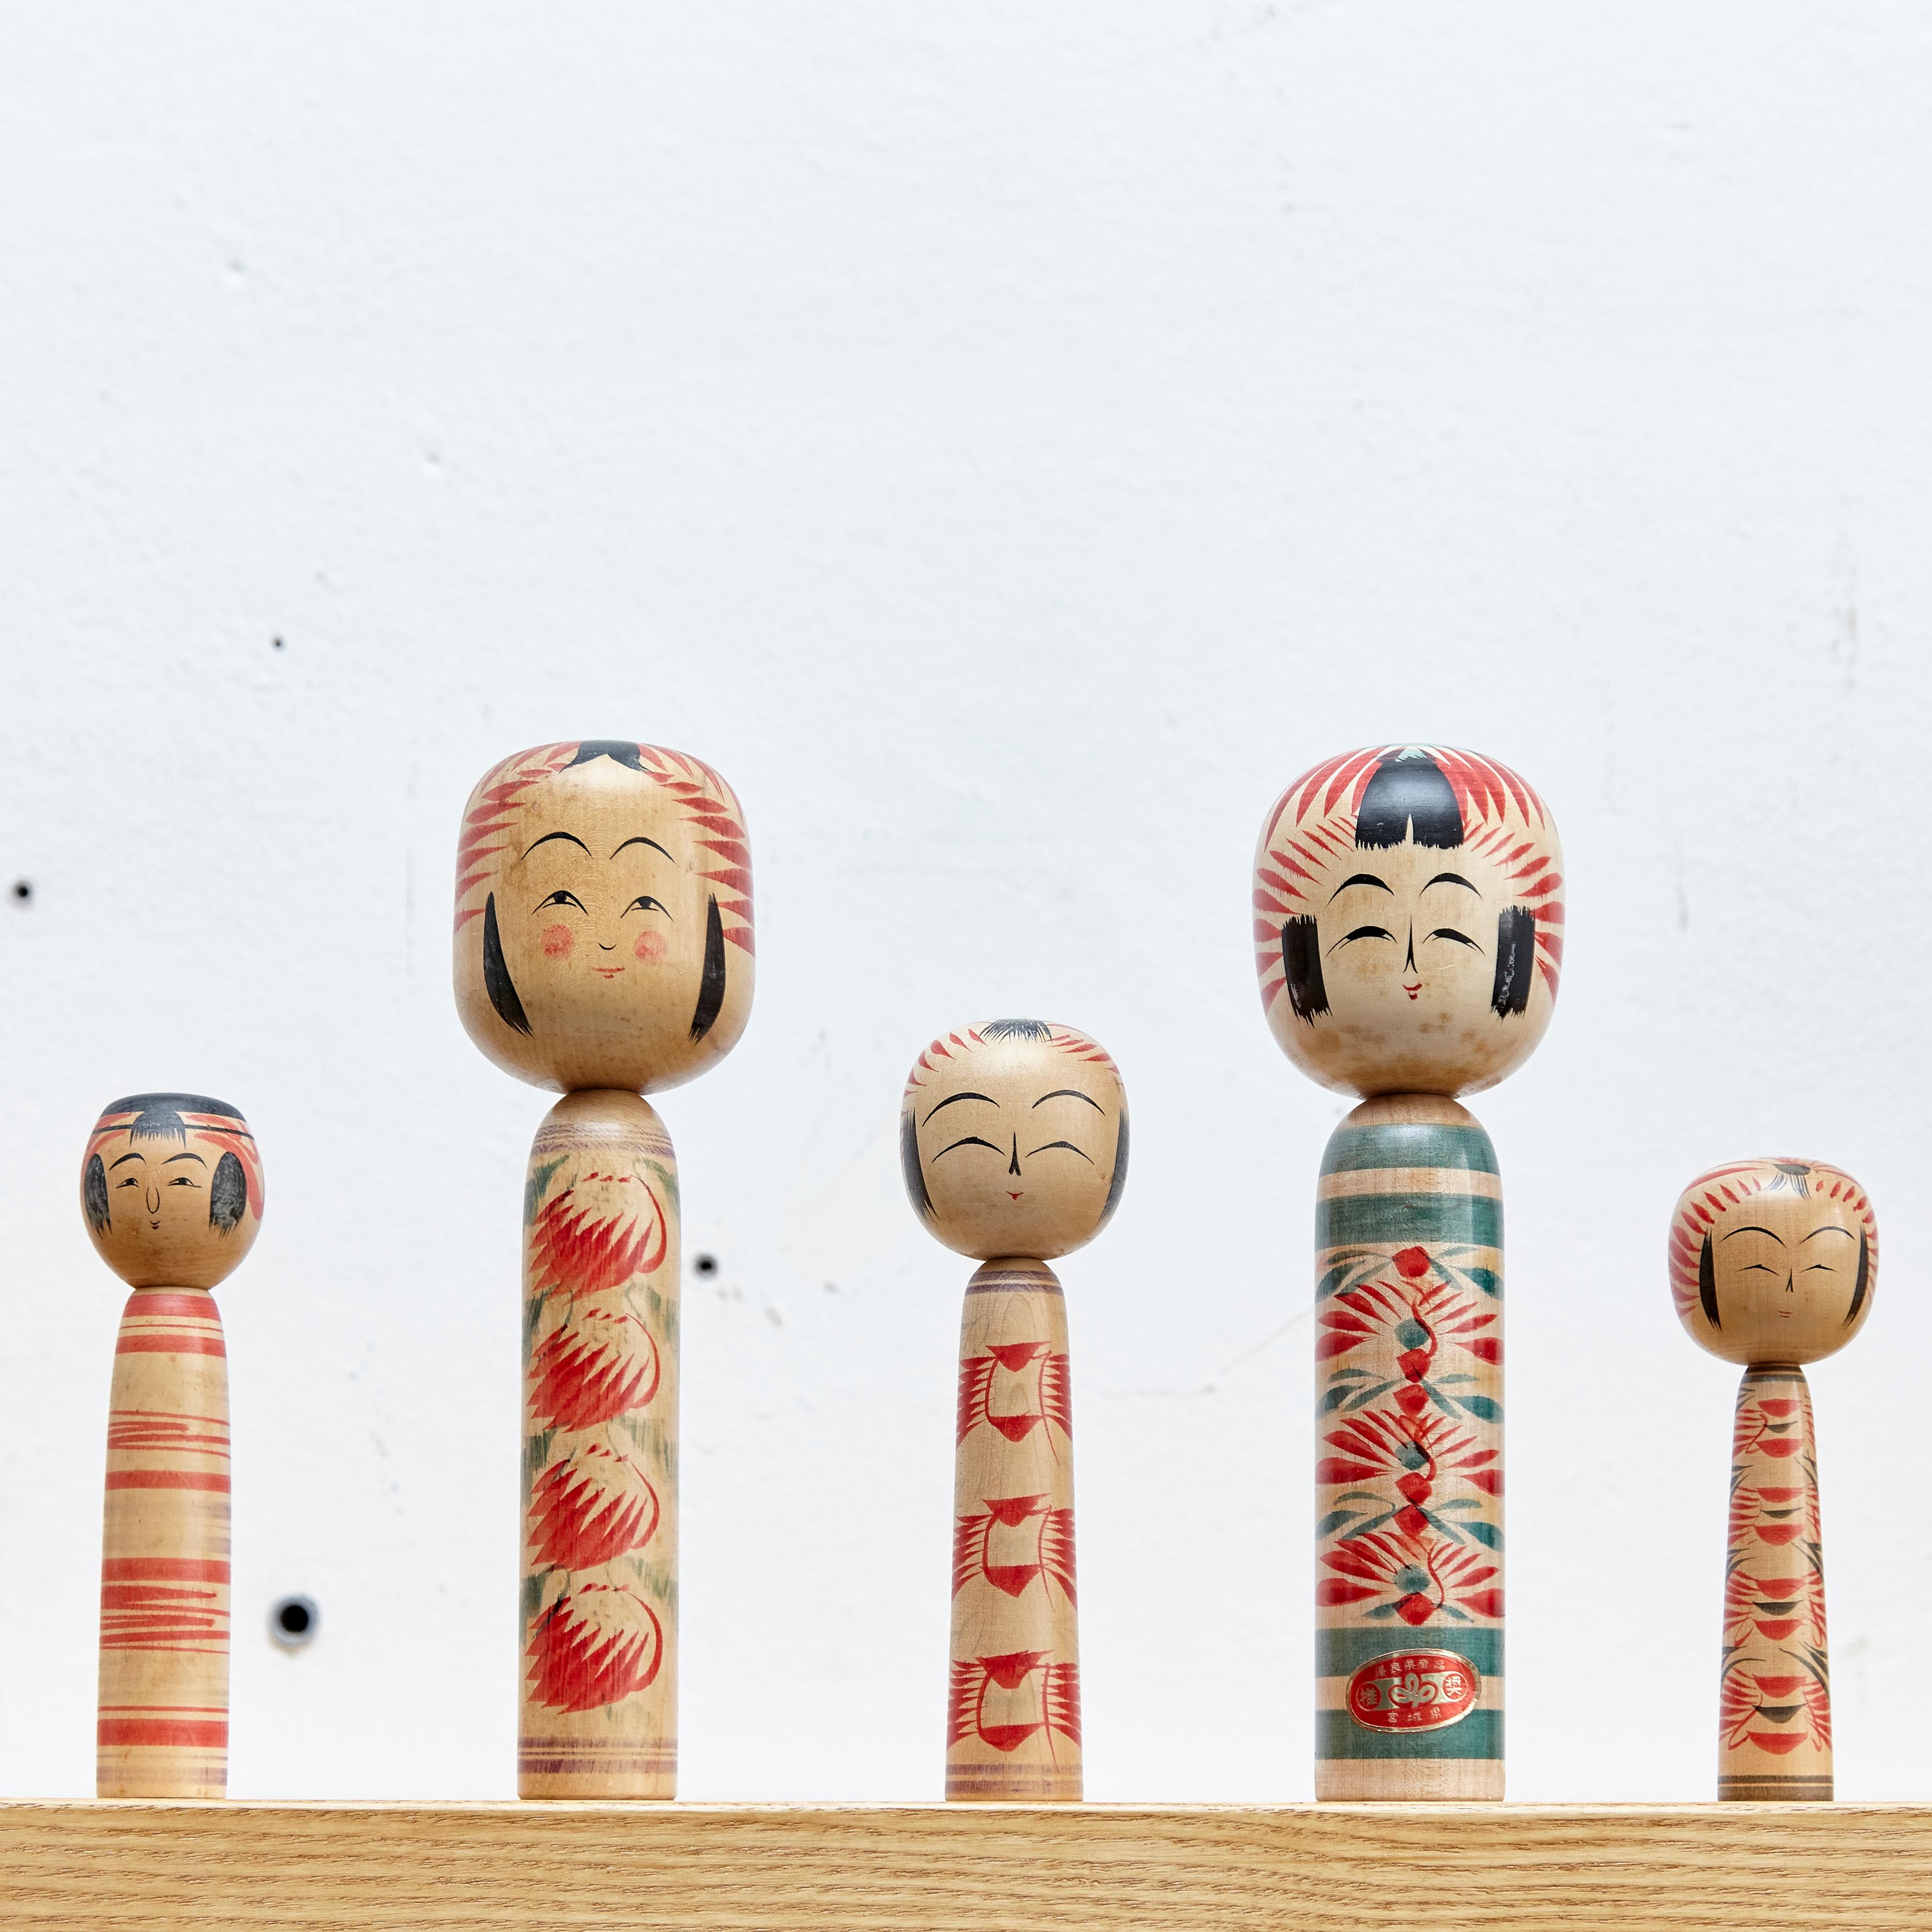 Japanese dolls called Kokeshi of the early 20th century.
Provenance from the northern Japan.
Set of 5.

Measures: 18.5 x 5.5 cm
24.5 x 7 cm
16.5 x 4.5 cm
15.5 x 5.5 cm
24.5 x 7 cm


Handmade by Japanese artisants from wood. Have a simple